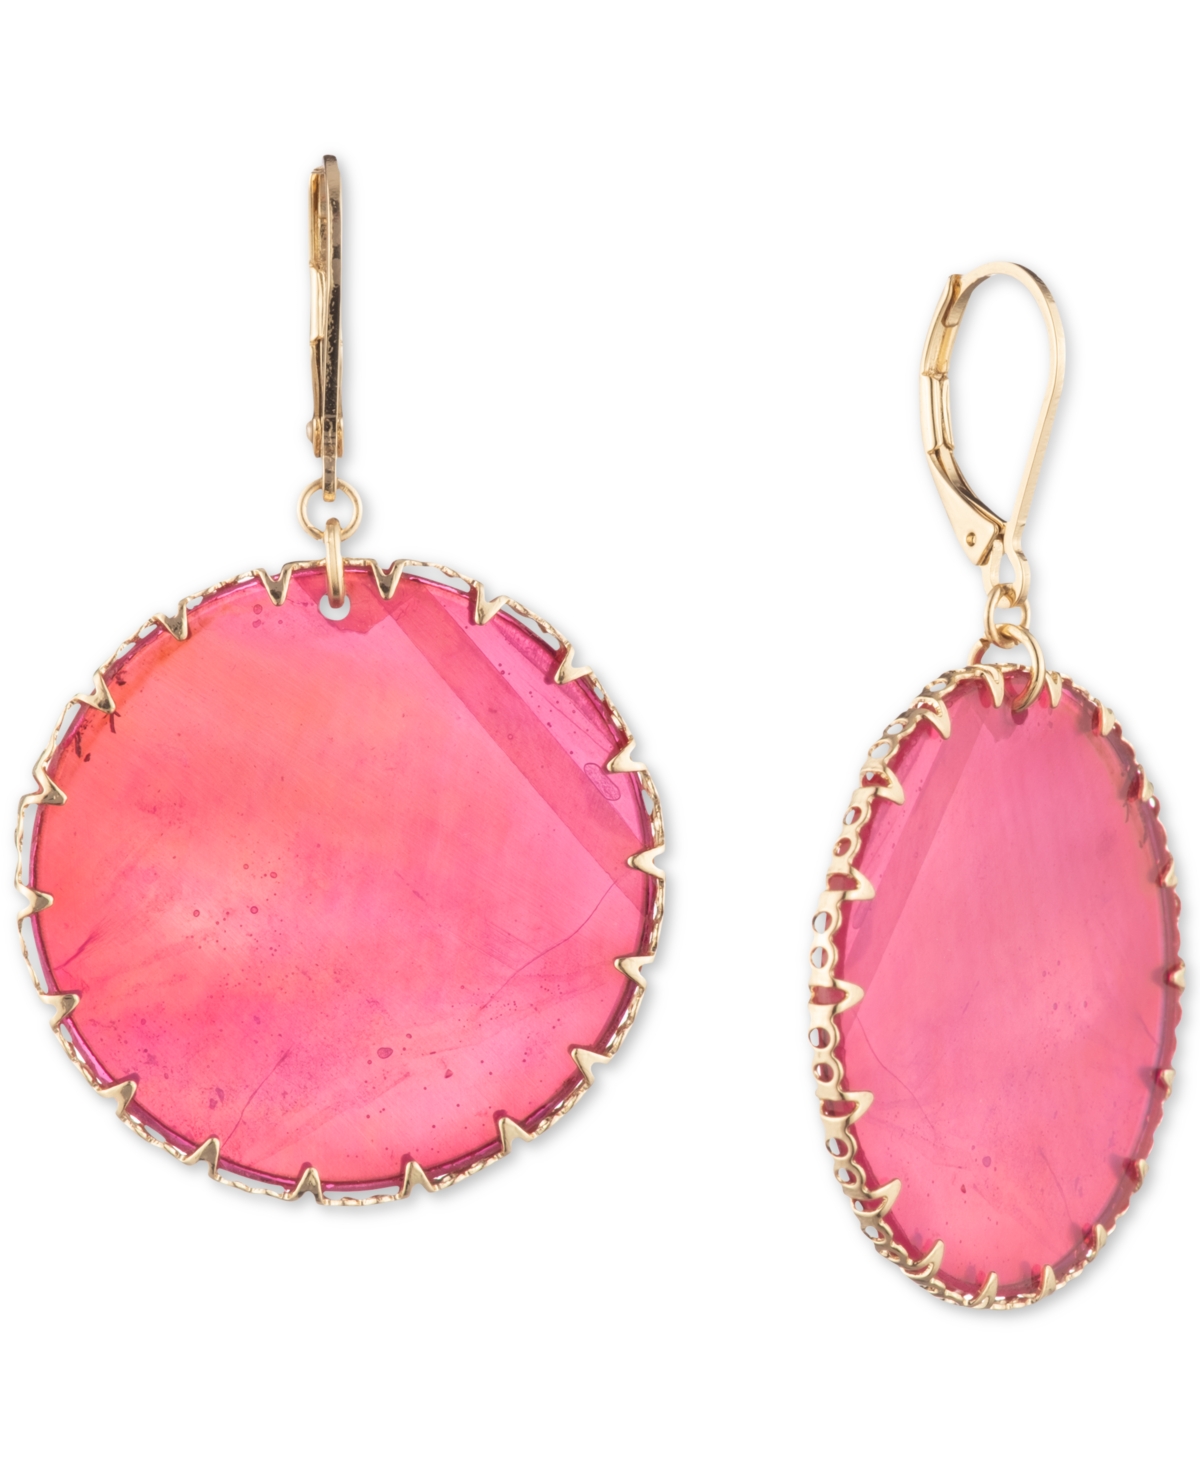 Gold-Tone Mother-of-Pearl Disc Drop Earrings - Pink